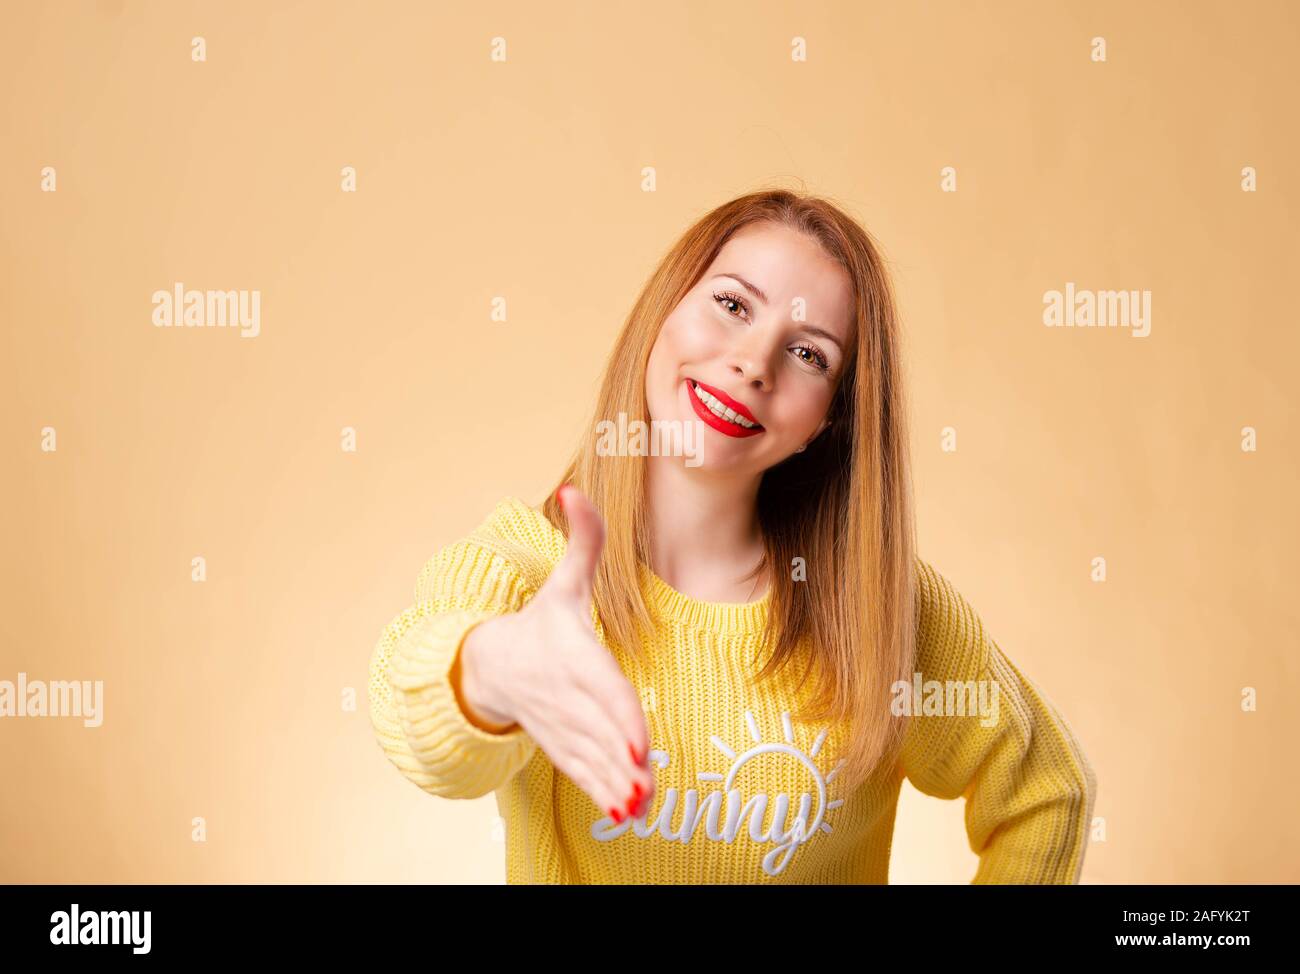 Young beautiful woman wearing casual t-shirt standing over isolated white background smiling friendly offering handshake as greeting and welcoming Stock Photo